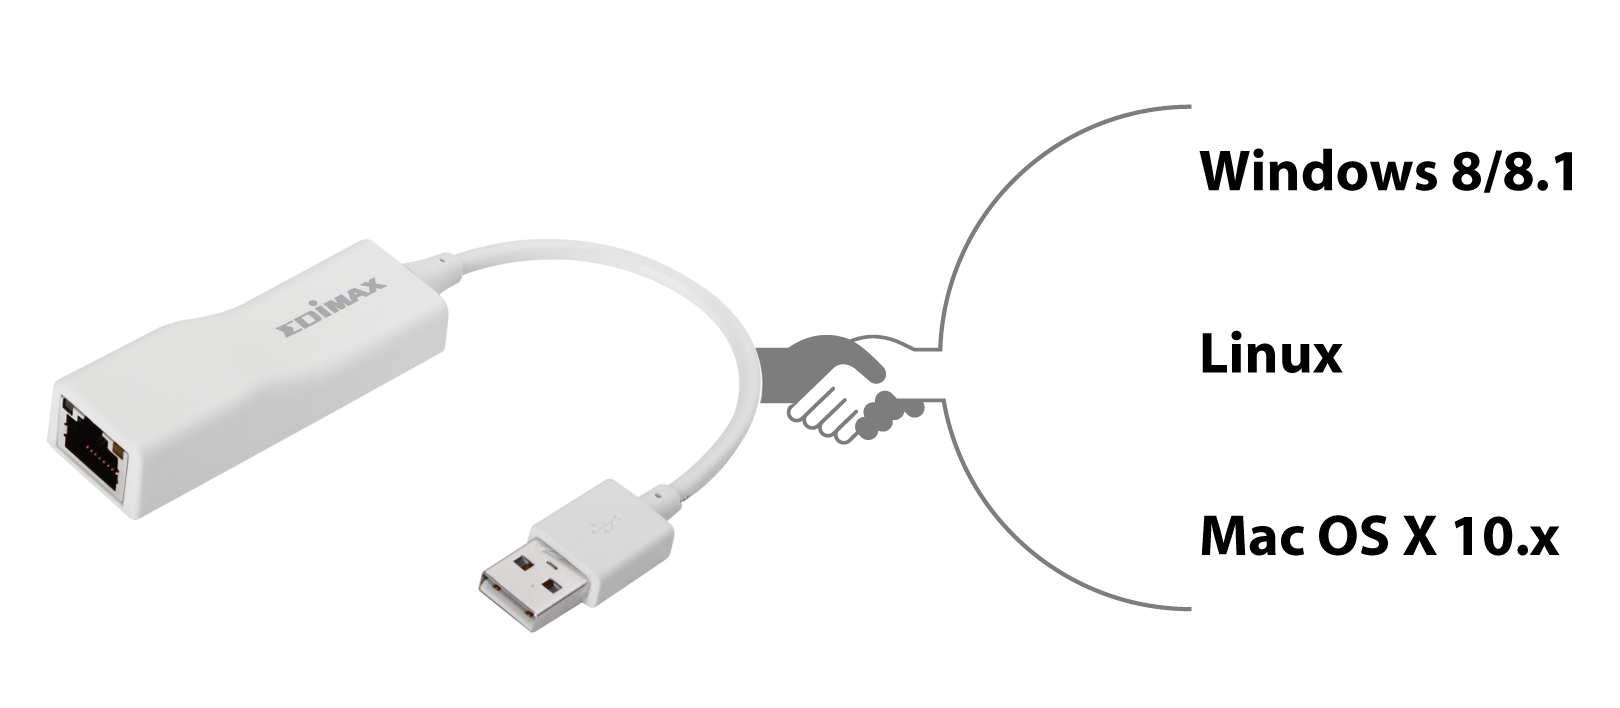 mac usb ethernet drivers for windows 10 free download